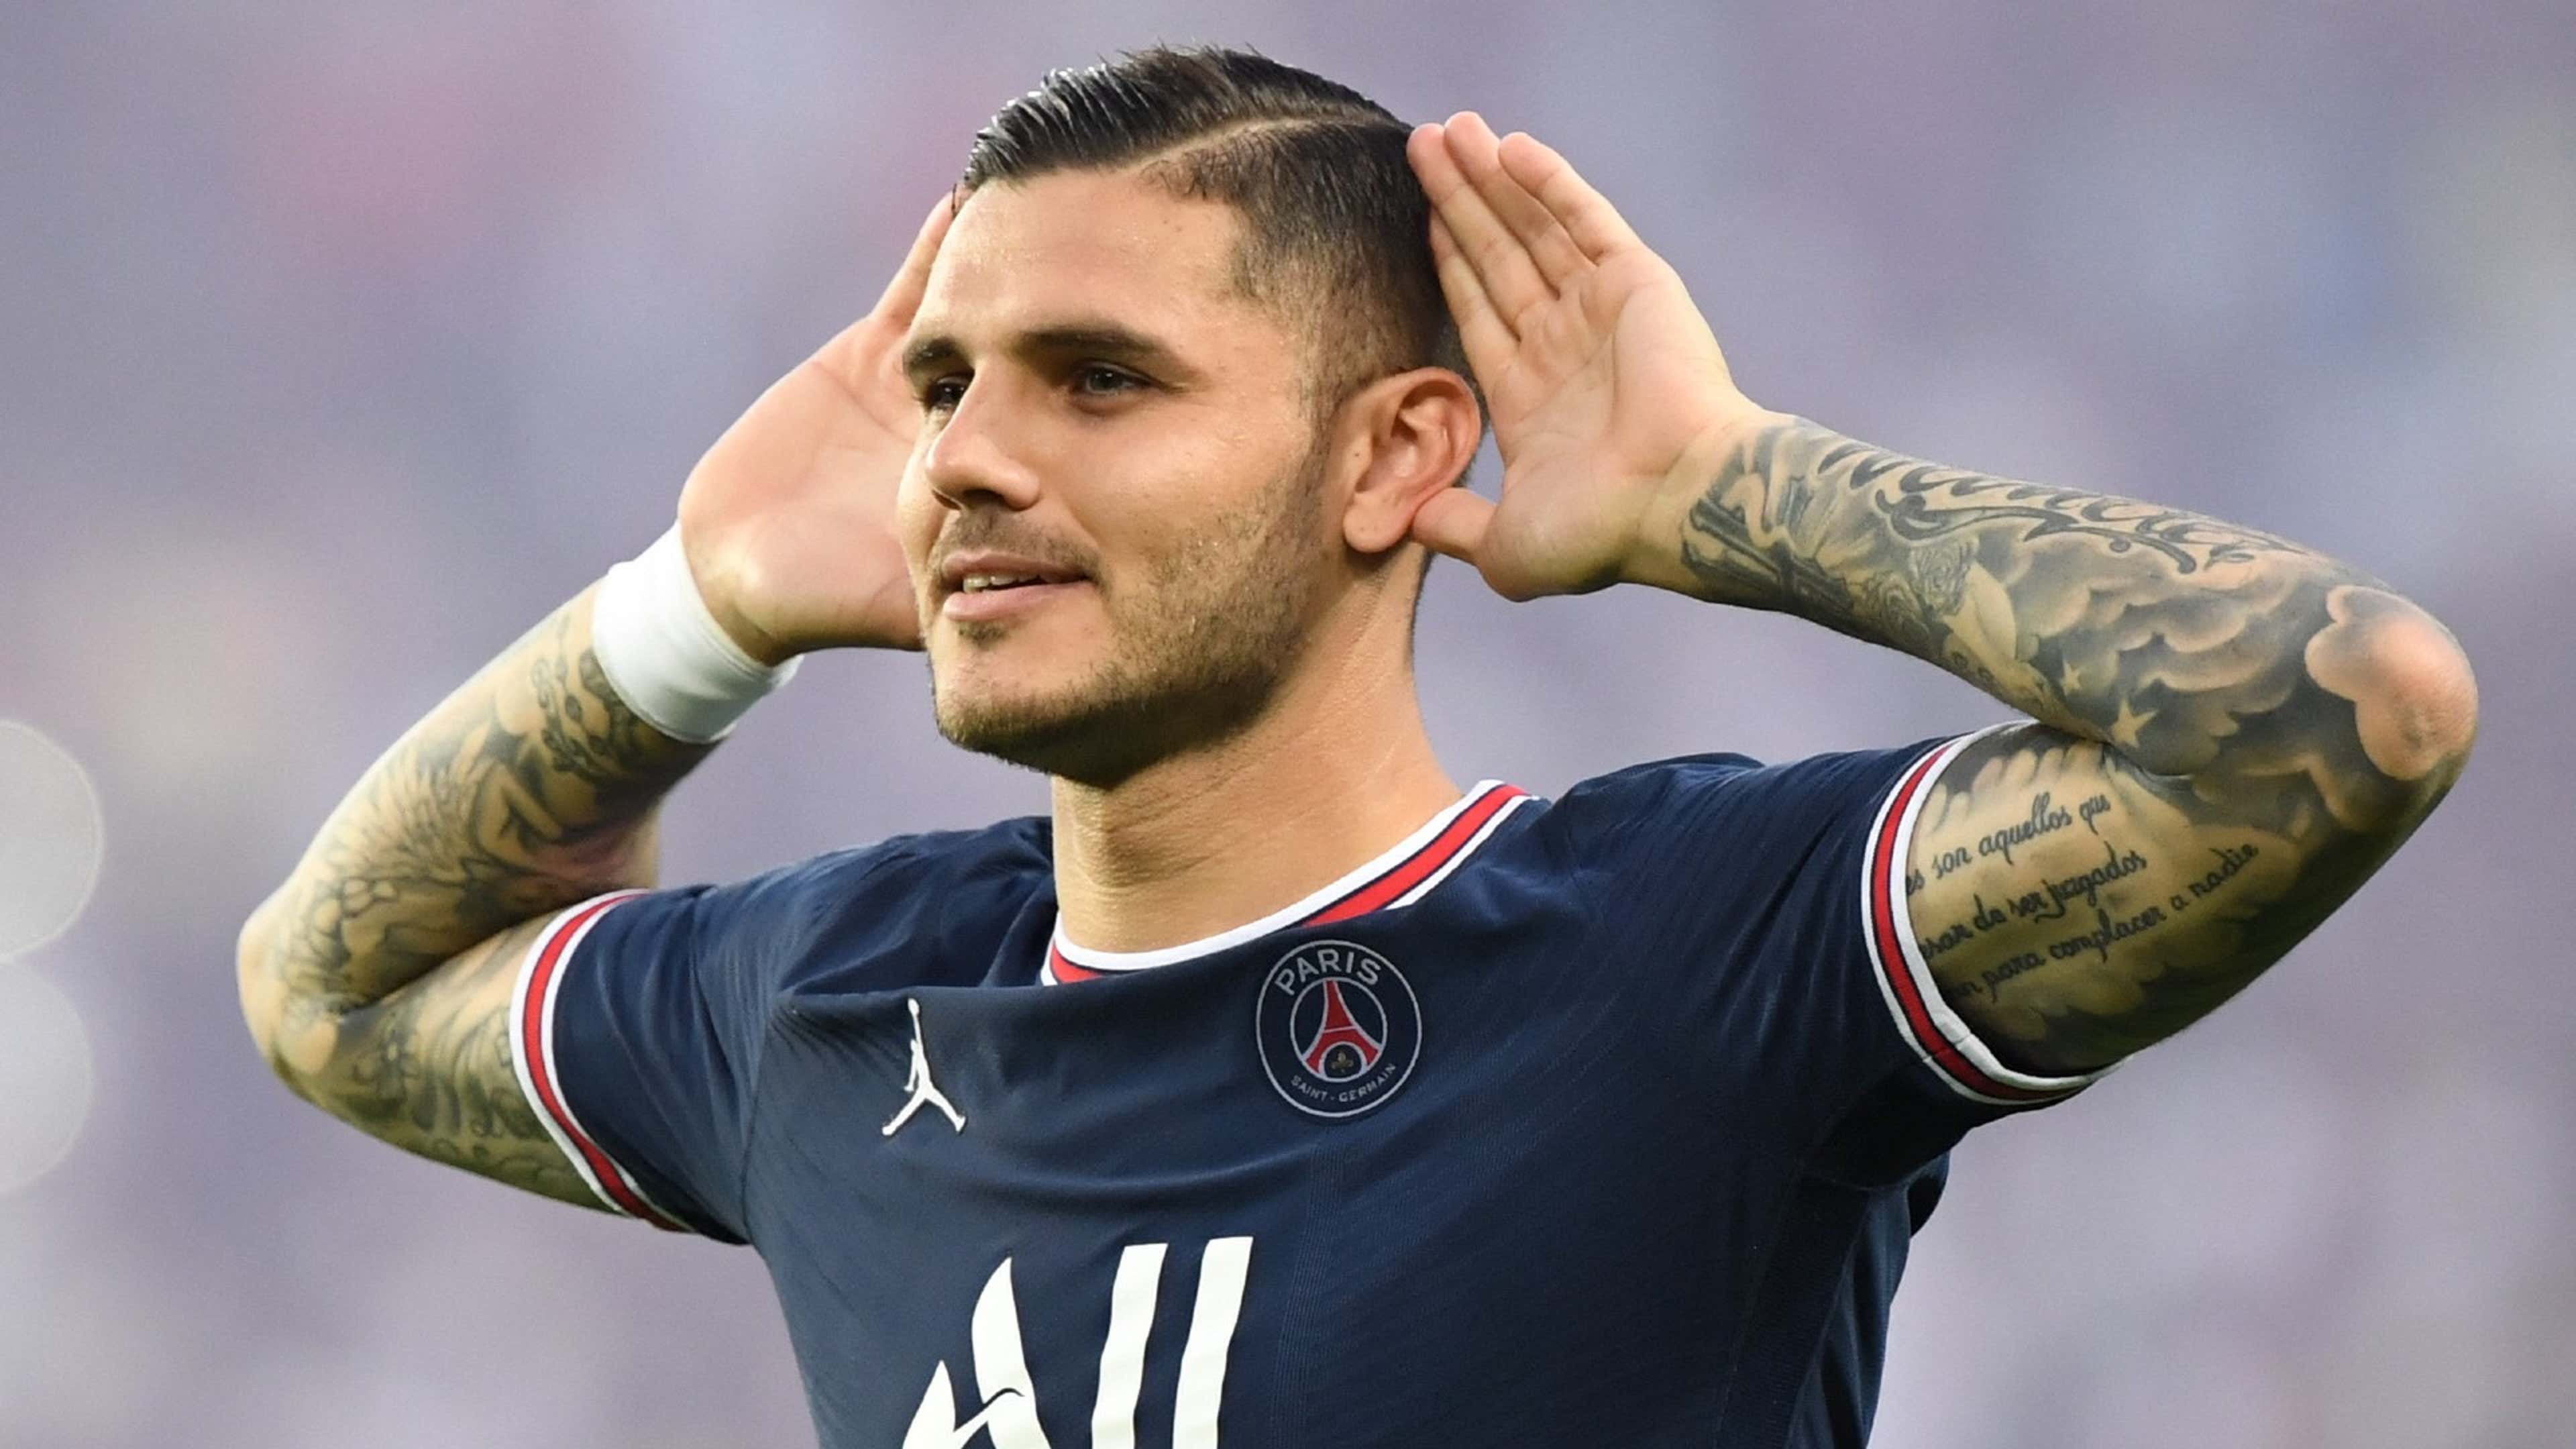 These stories are a load of cr*p!' - PSG's Icardi issues furious response  to transfer reports